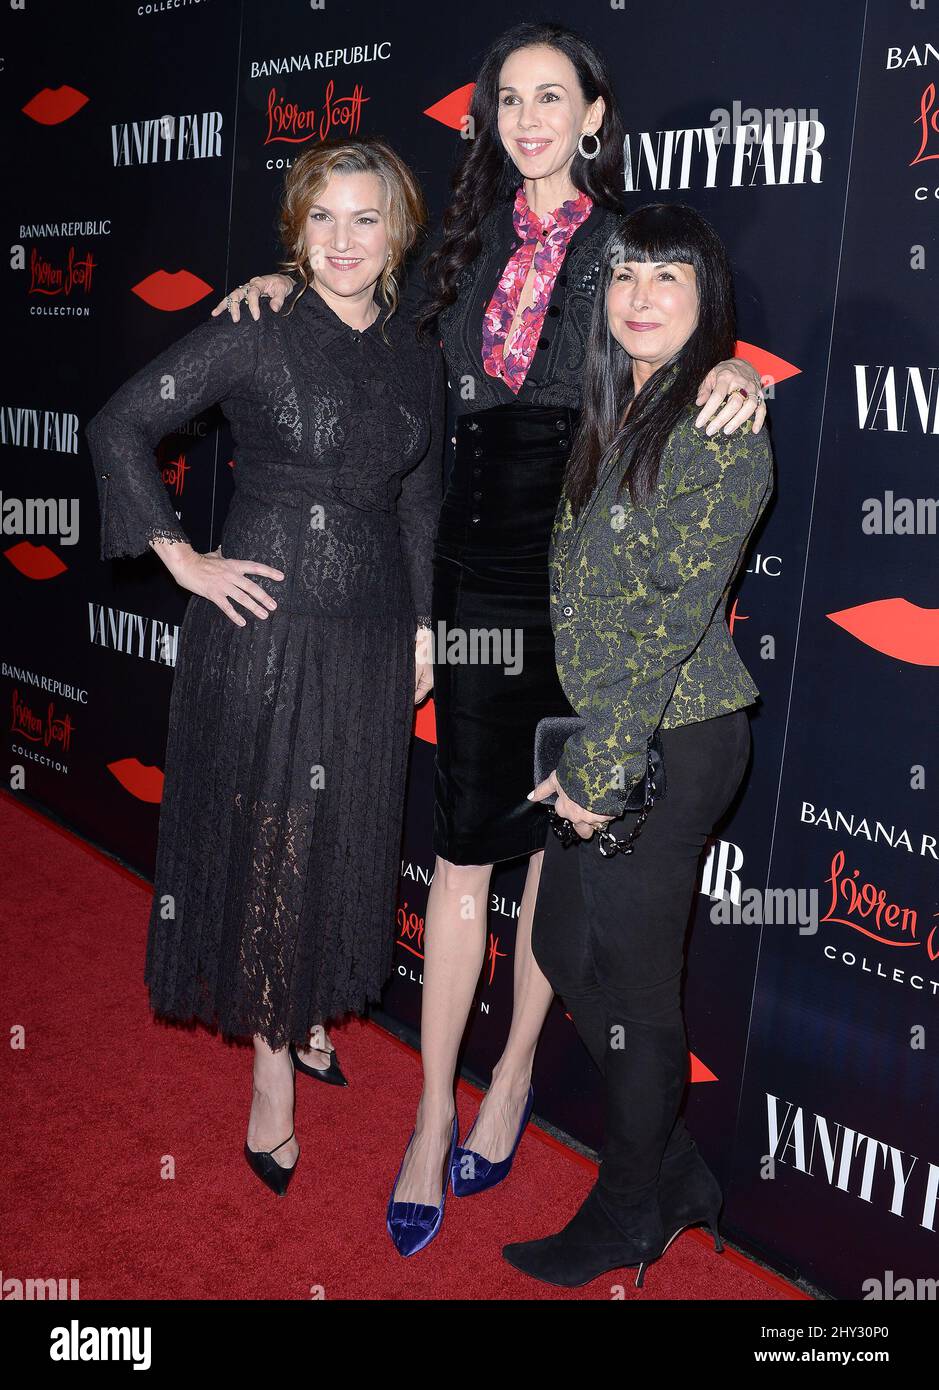 Krista Smith, L'Wren Scott and Catherine Sadler attending the Banana Republic L'Wren Scott Collection launch at the Chateau Marmont in Los Angeles, California. Stock Photo